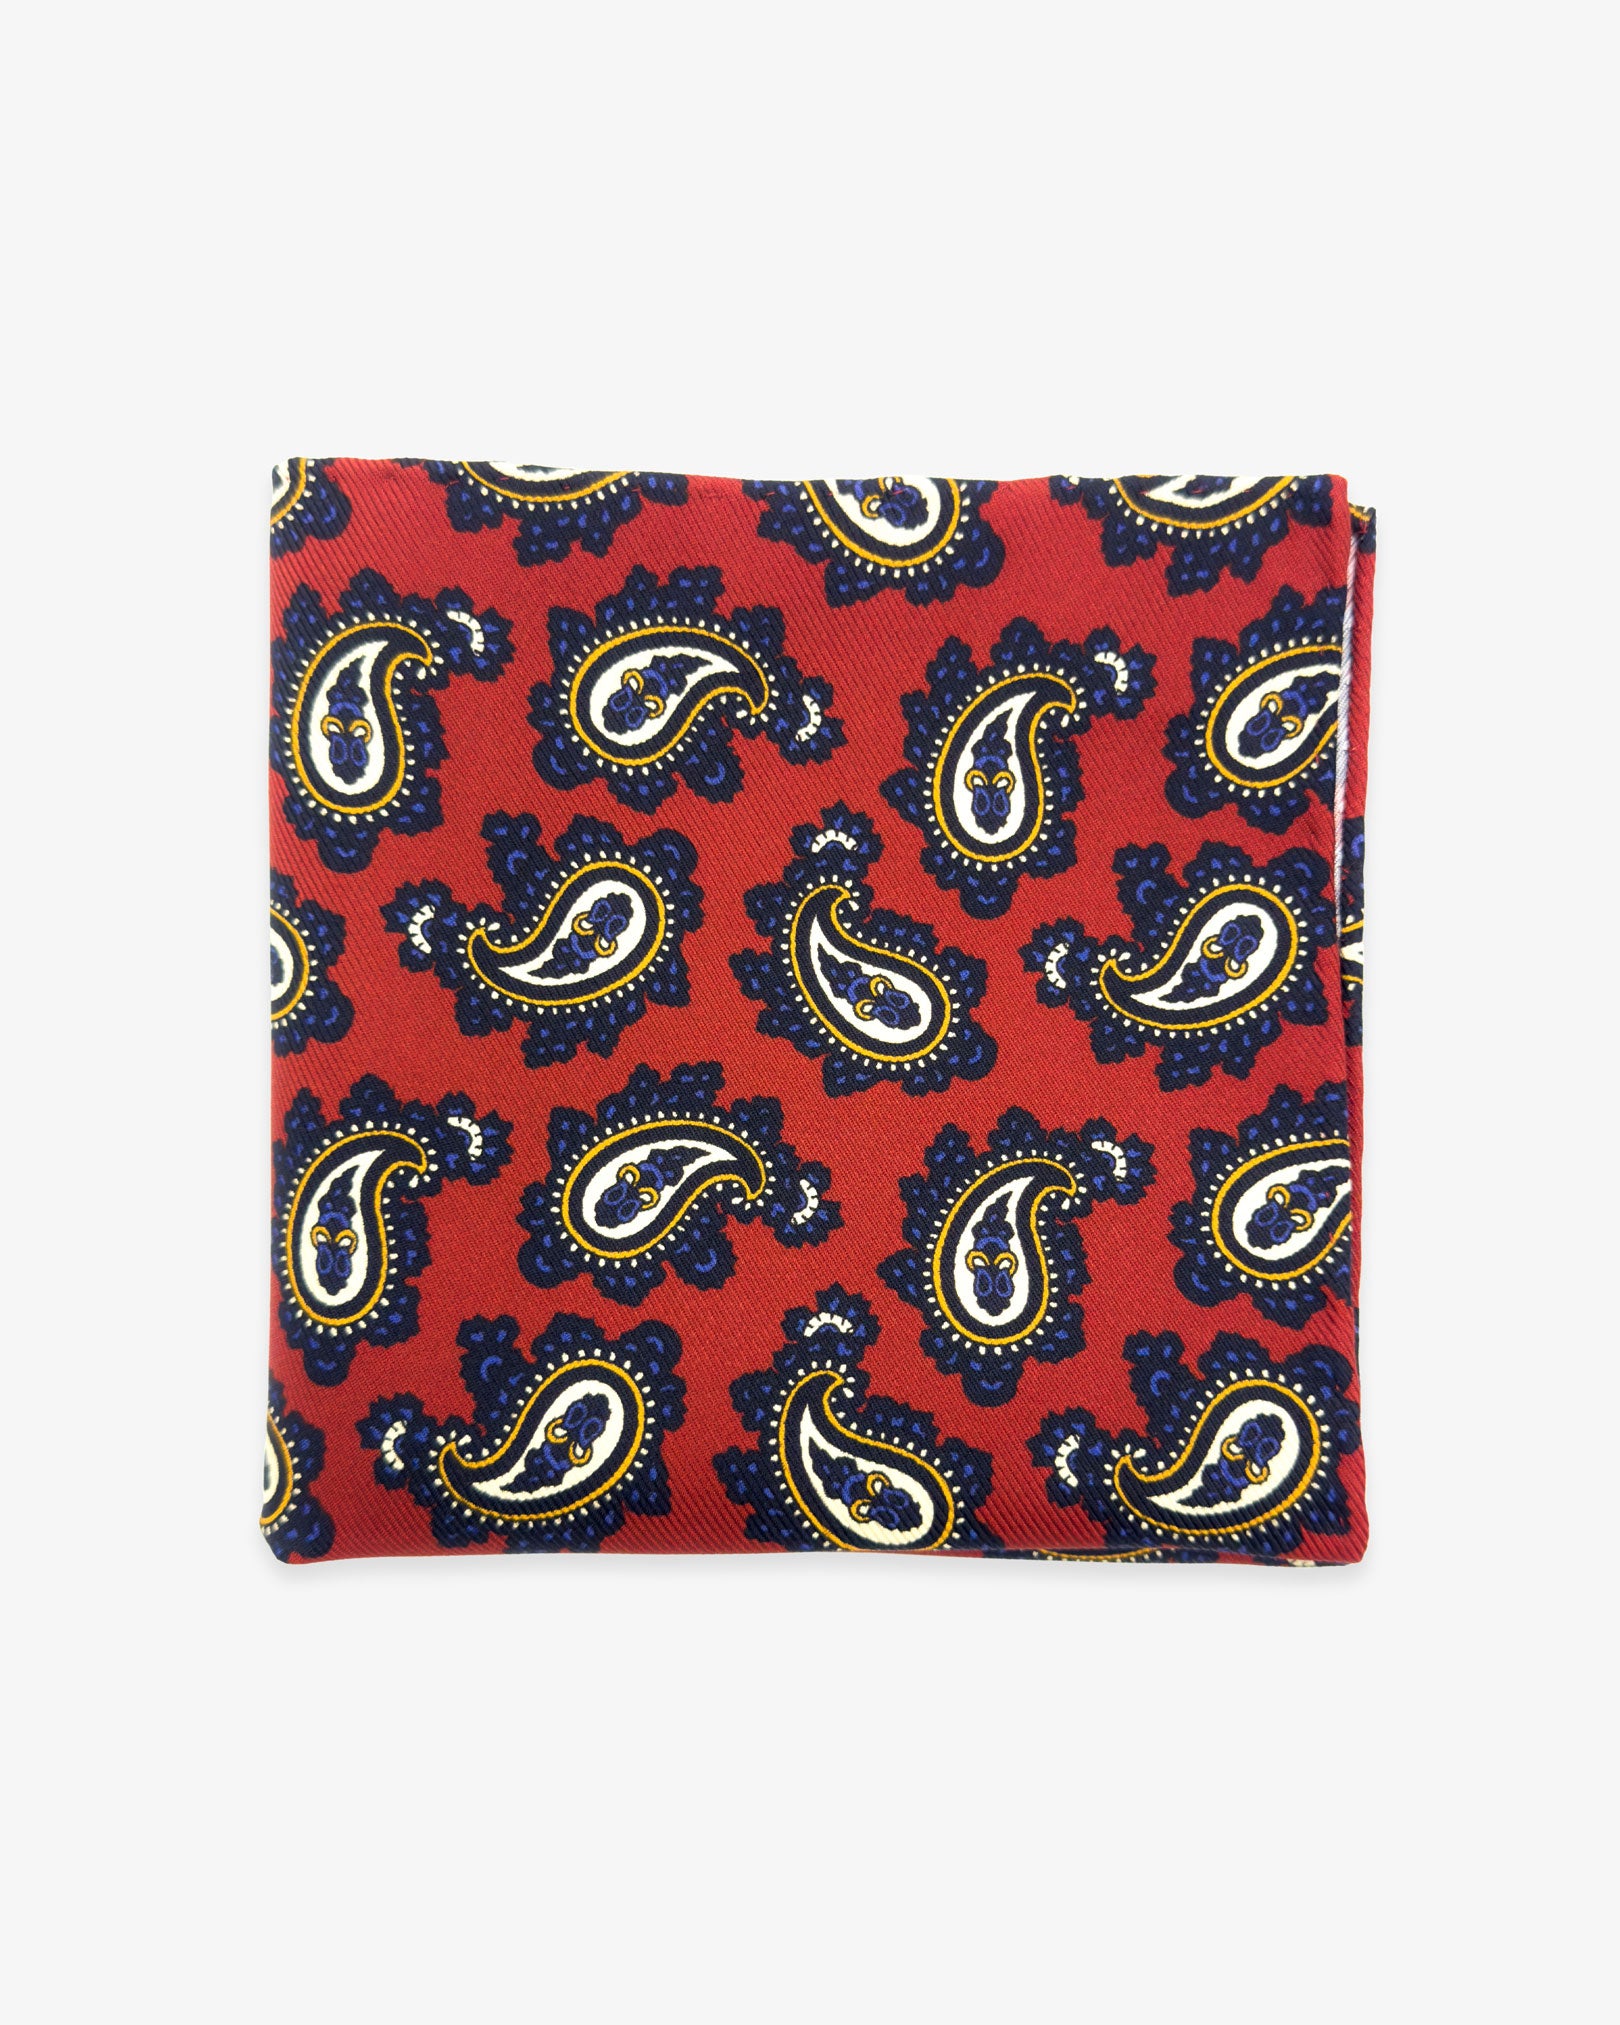 The 'Binham' silk pocket square from SOHO Scarves UK collection. Folded into a quarter, showing the classic paisley patterns against a red background.